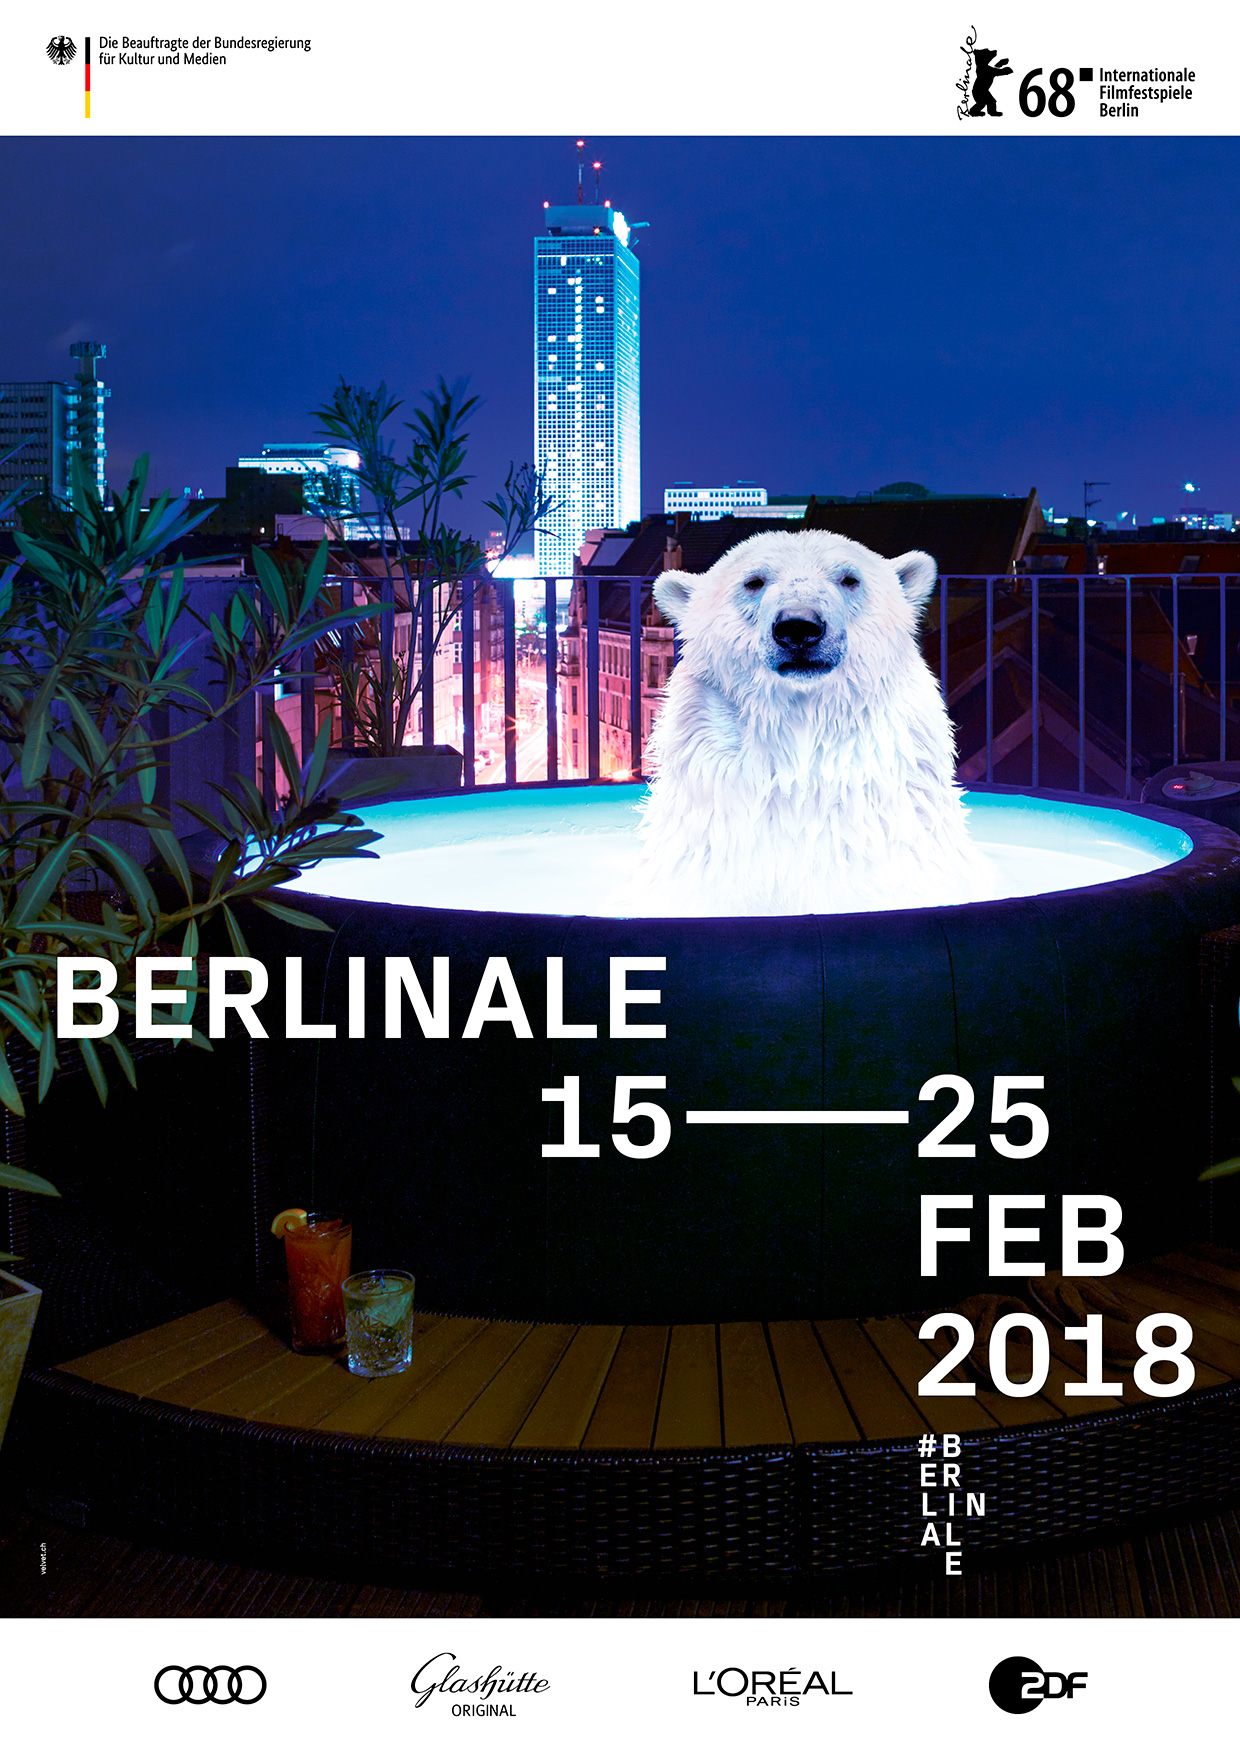 The 68th Berlinale